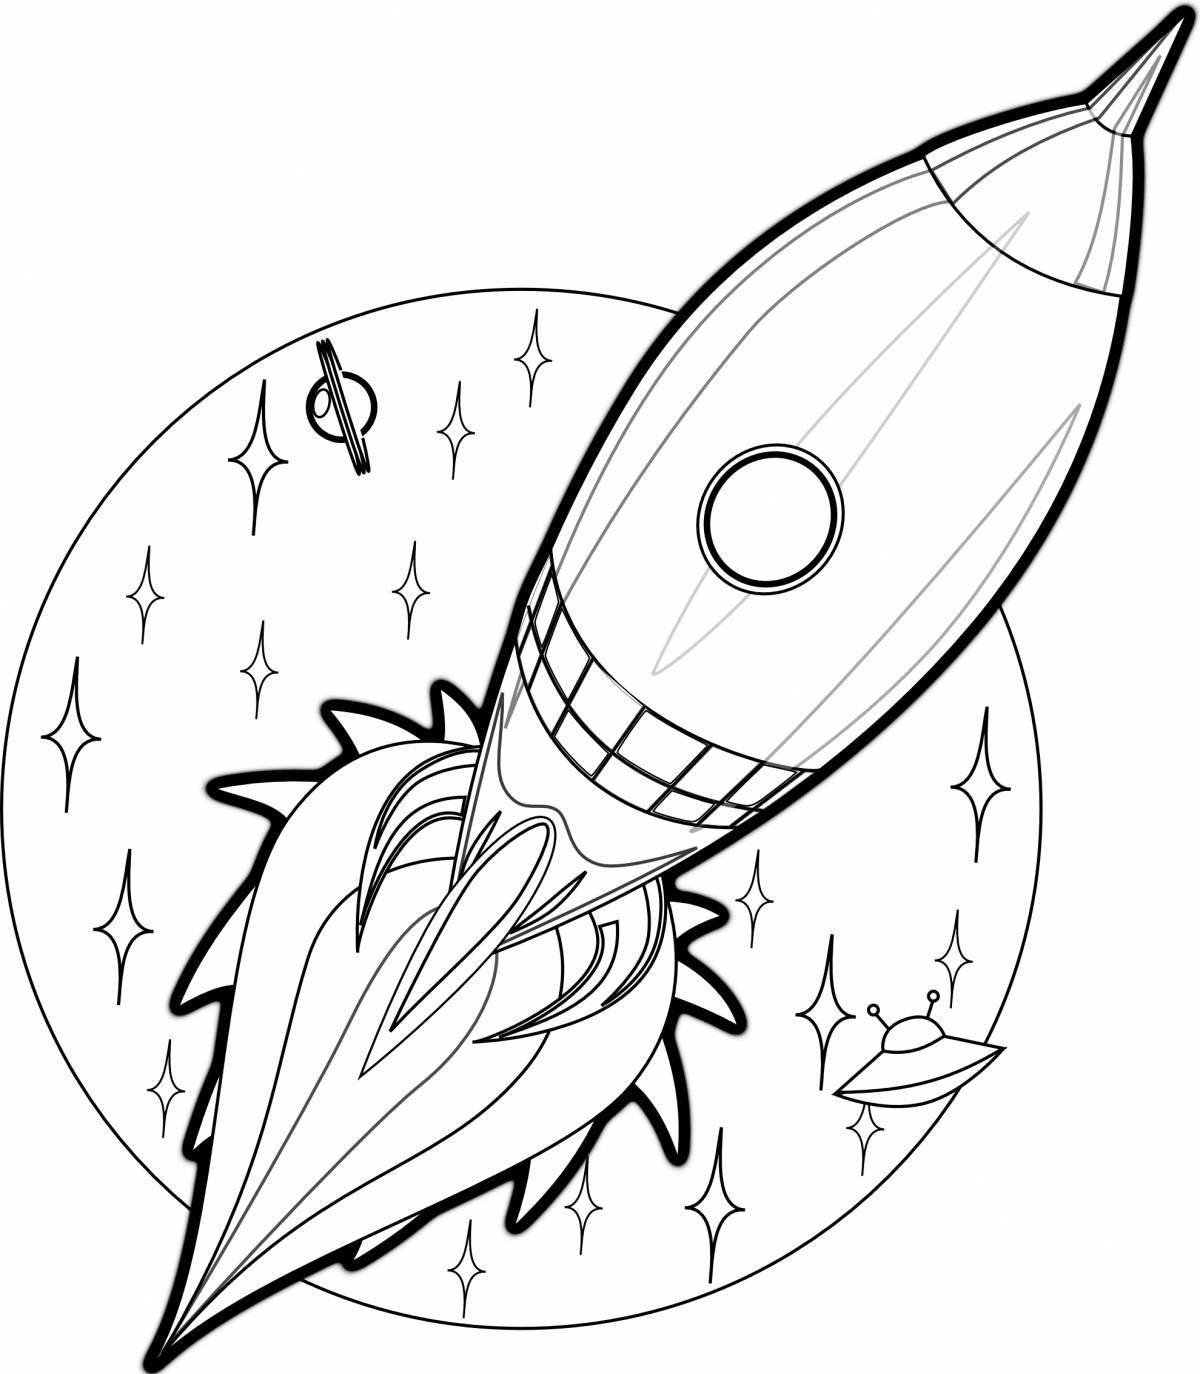 Fantastic rocket coloring book for children 6-7 years old